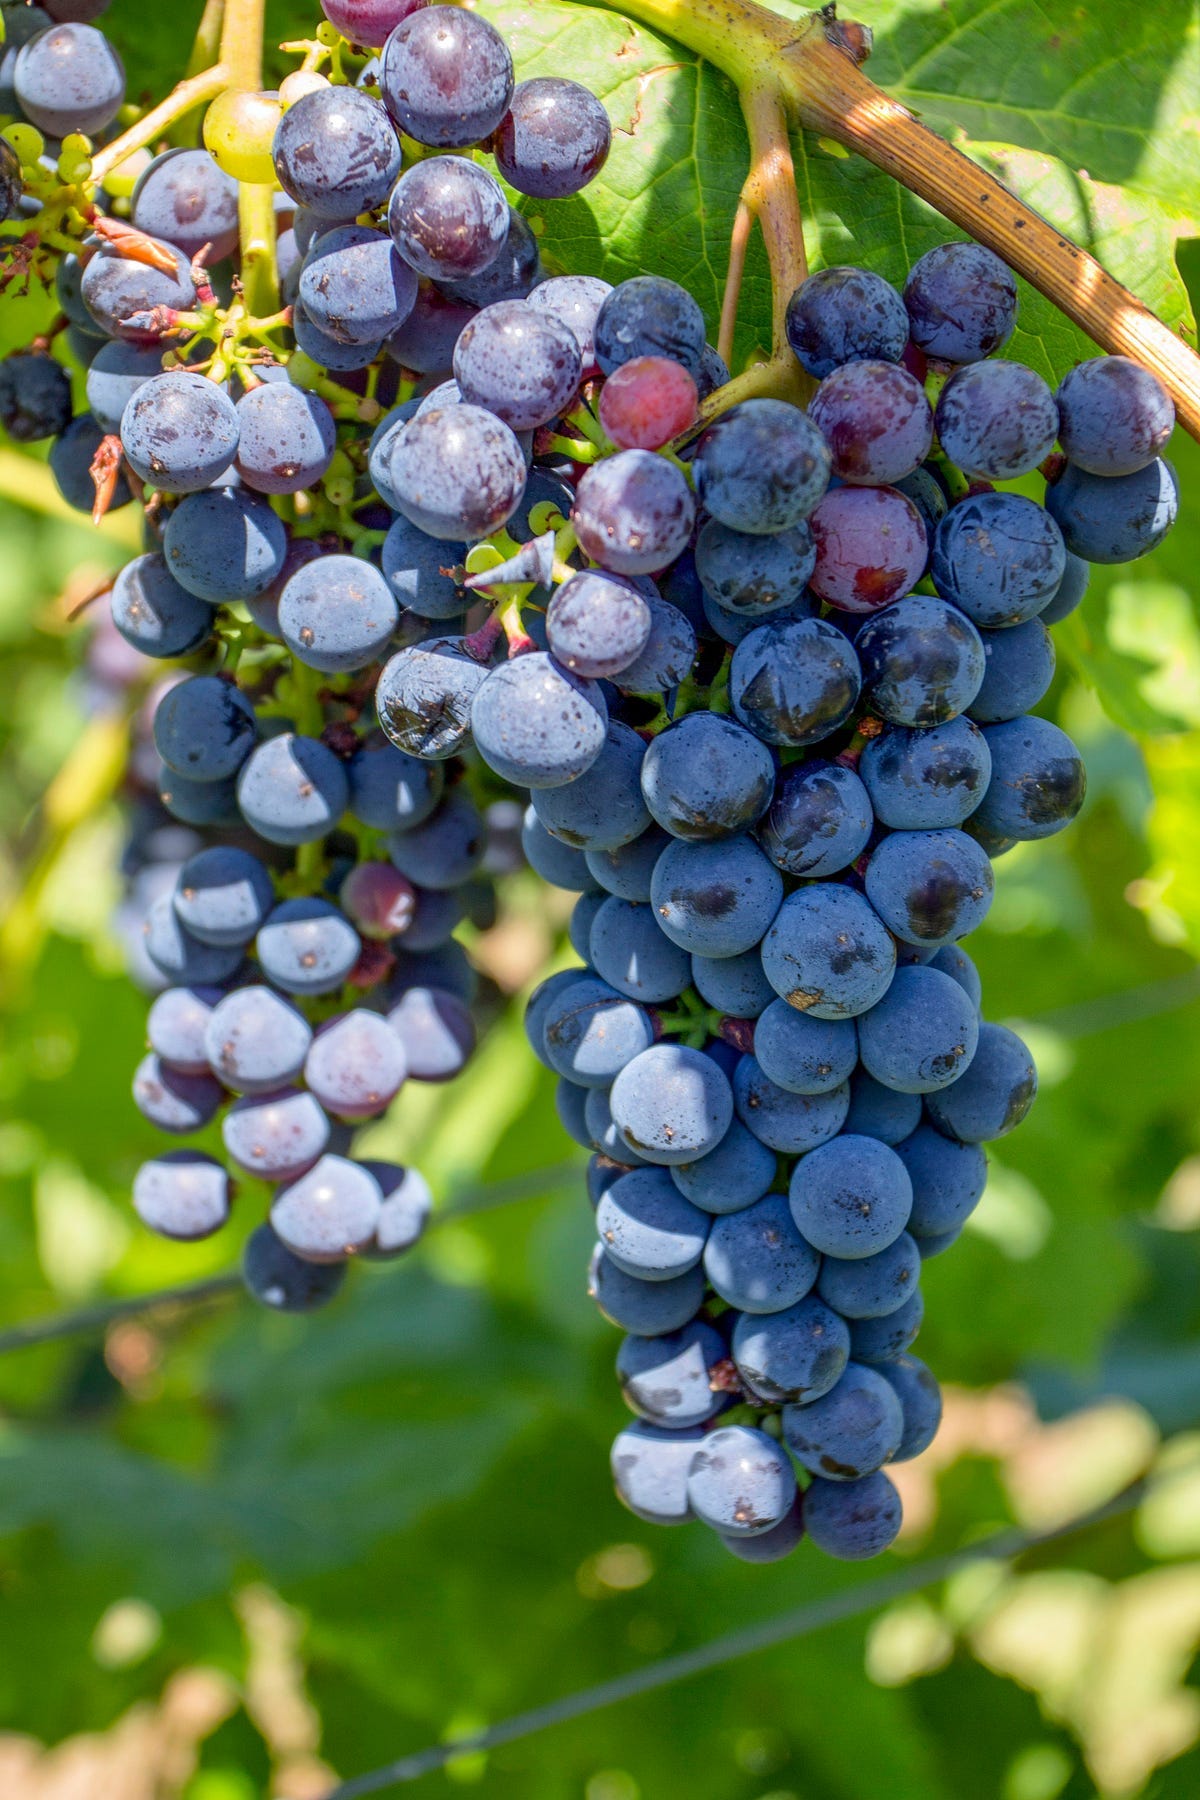 Grapes growing on a tree